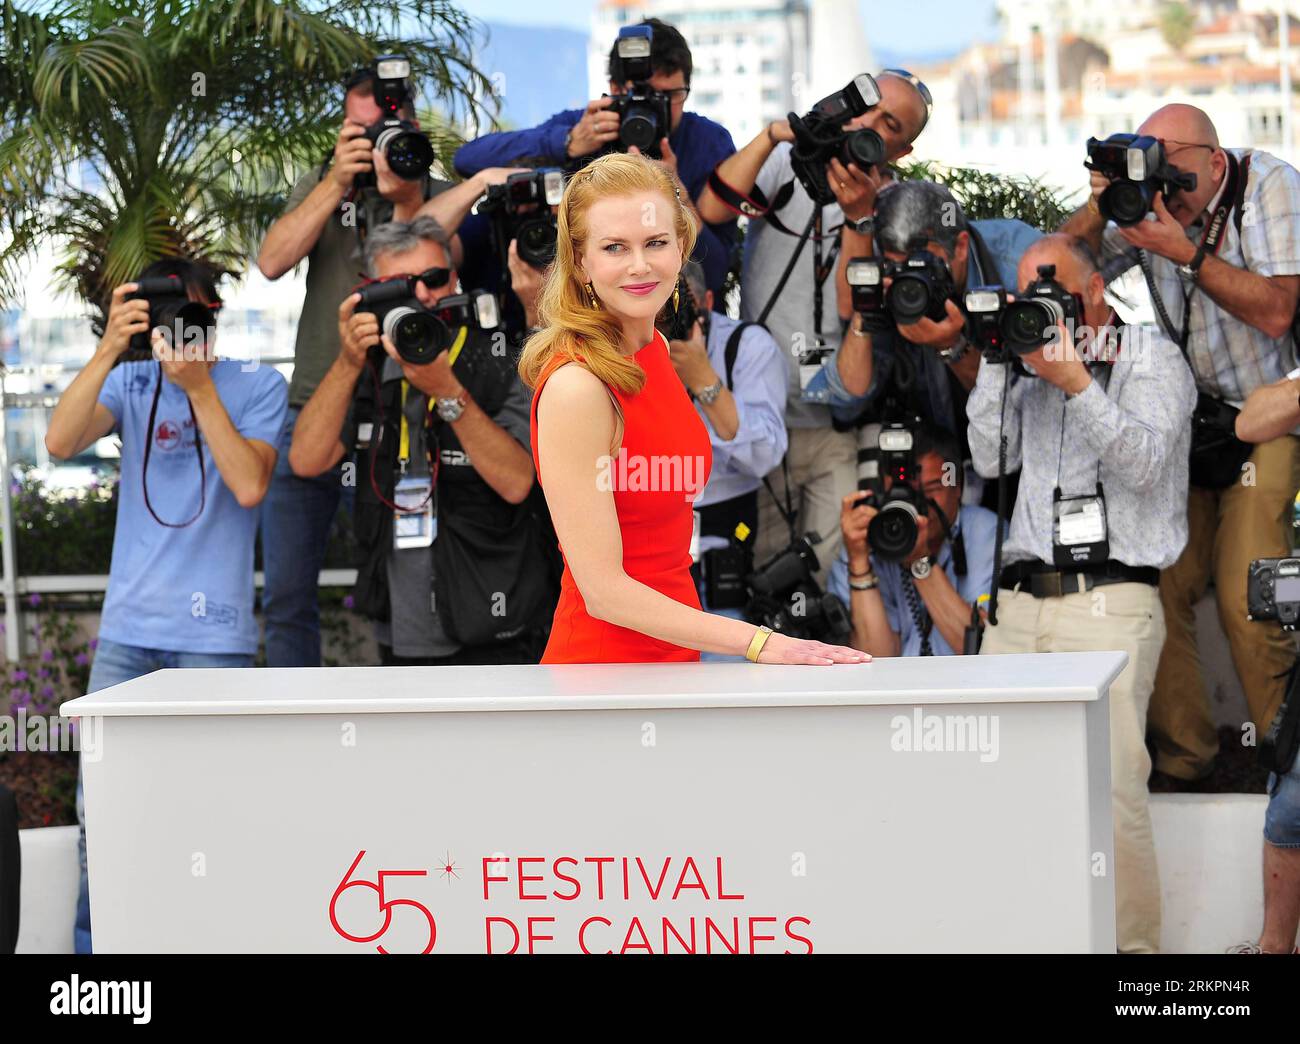 Bildnummer: 58030792  Datum: 24.05.2012  Copyright: imago/Xinhua (120524) -- CANNES, May 24, 2012 (Xinhua) --Actress Nicole Kidman poses for photos during a photo call for the film The Paperboy at the 65th Cannes Film Festival, in Cannes, southern France, May 24, 2012.(Xinhua/Ye Pingfan)(srb) FRANCE-CANNES-FILM FESTIVAL-PHOTO CALL-THE PAPERBOY PUBLICATIONxNOTxINxCHN Kultur Entertainment People Film 65. Internationale Filmfestspiele Cannes x0x xkg 2012 quer      58030792 Date 24 05 2012 Copyright Imago XINHUA  Cannes May 24 2012 XINHUA actress Nicole Kidman Poses for Photos during a Photo Call Stock Photo